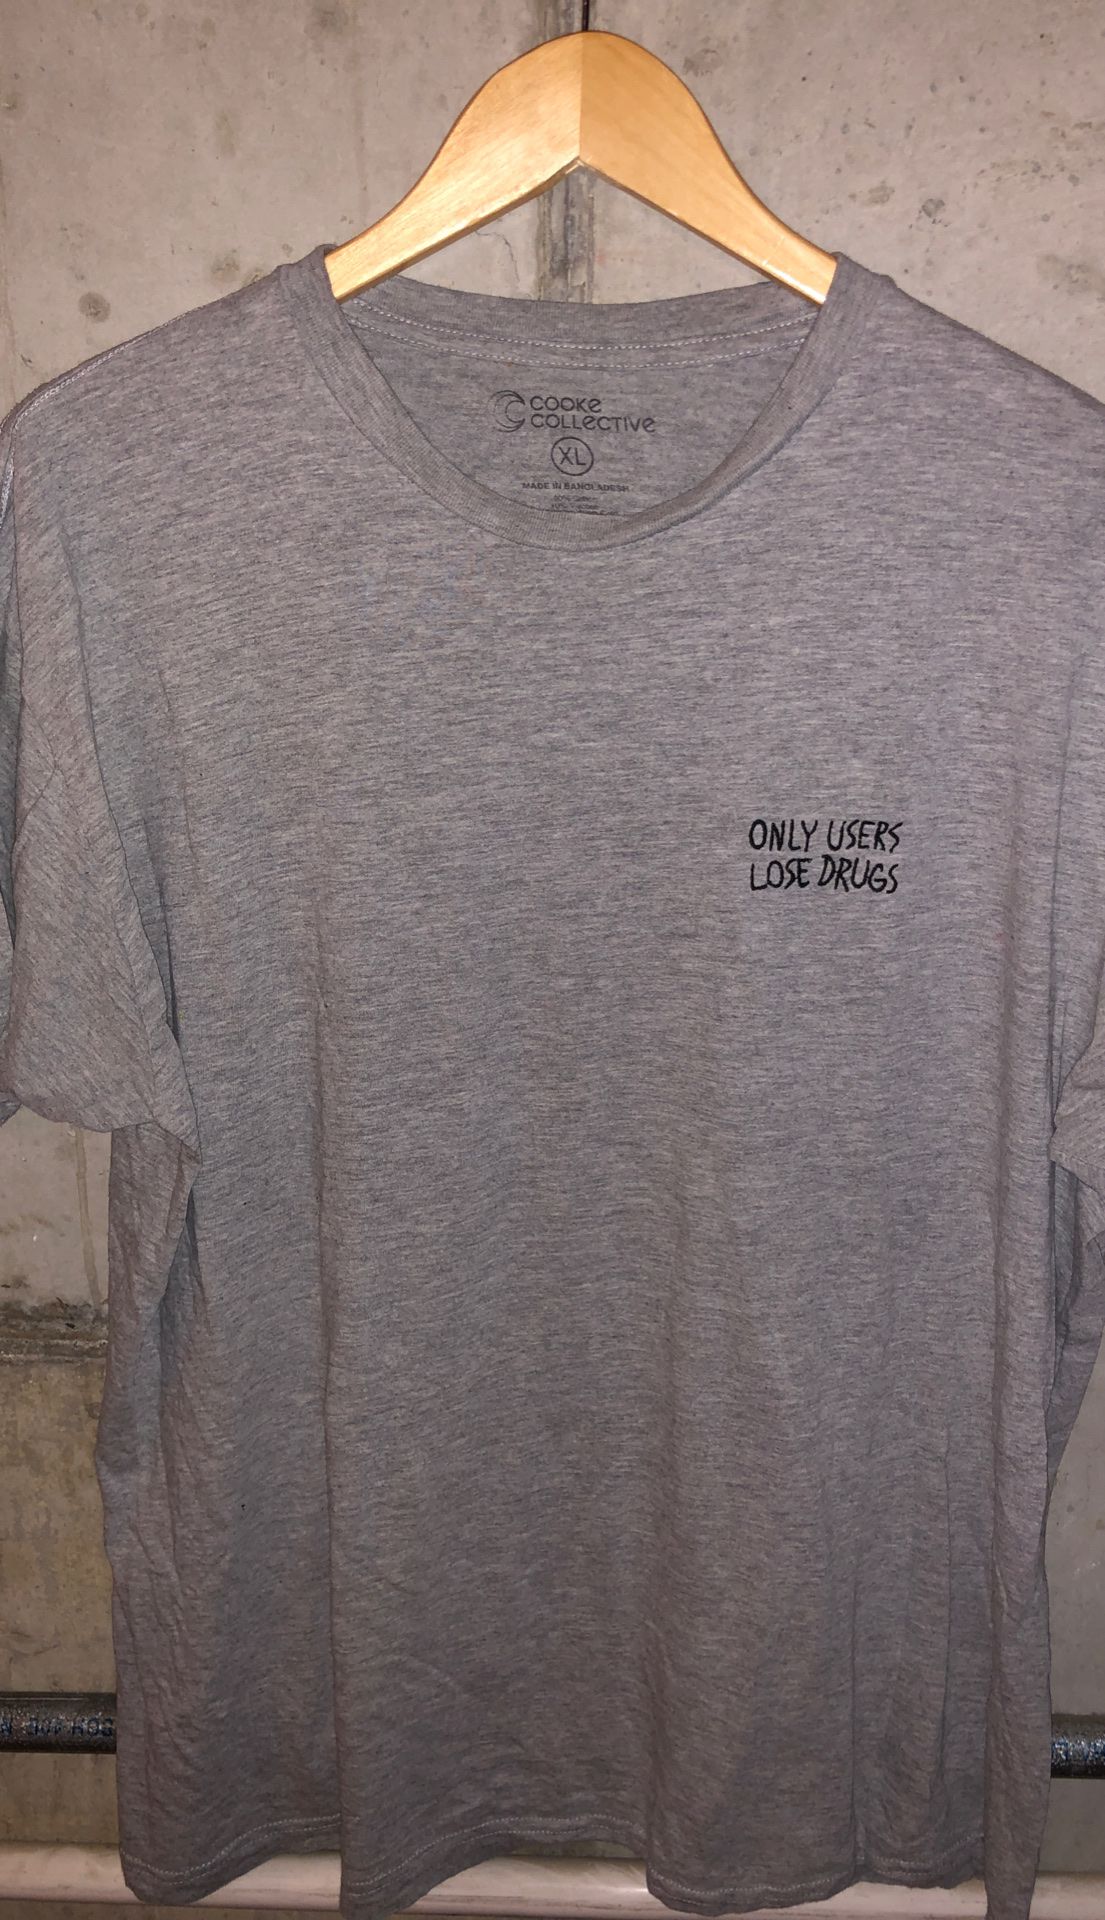 Cooke Collective Only users lose drugs tee urban outfitters XL